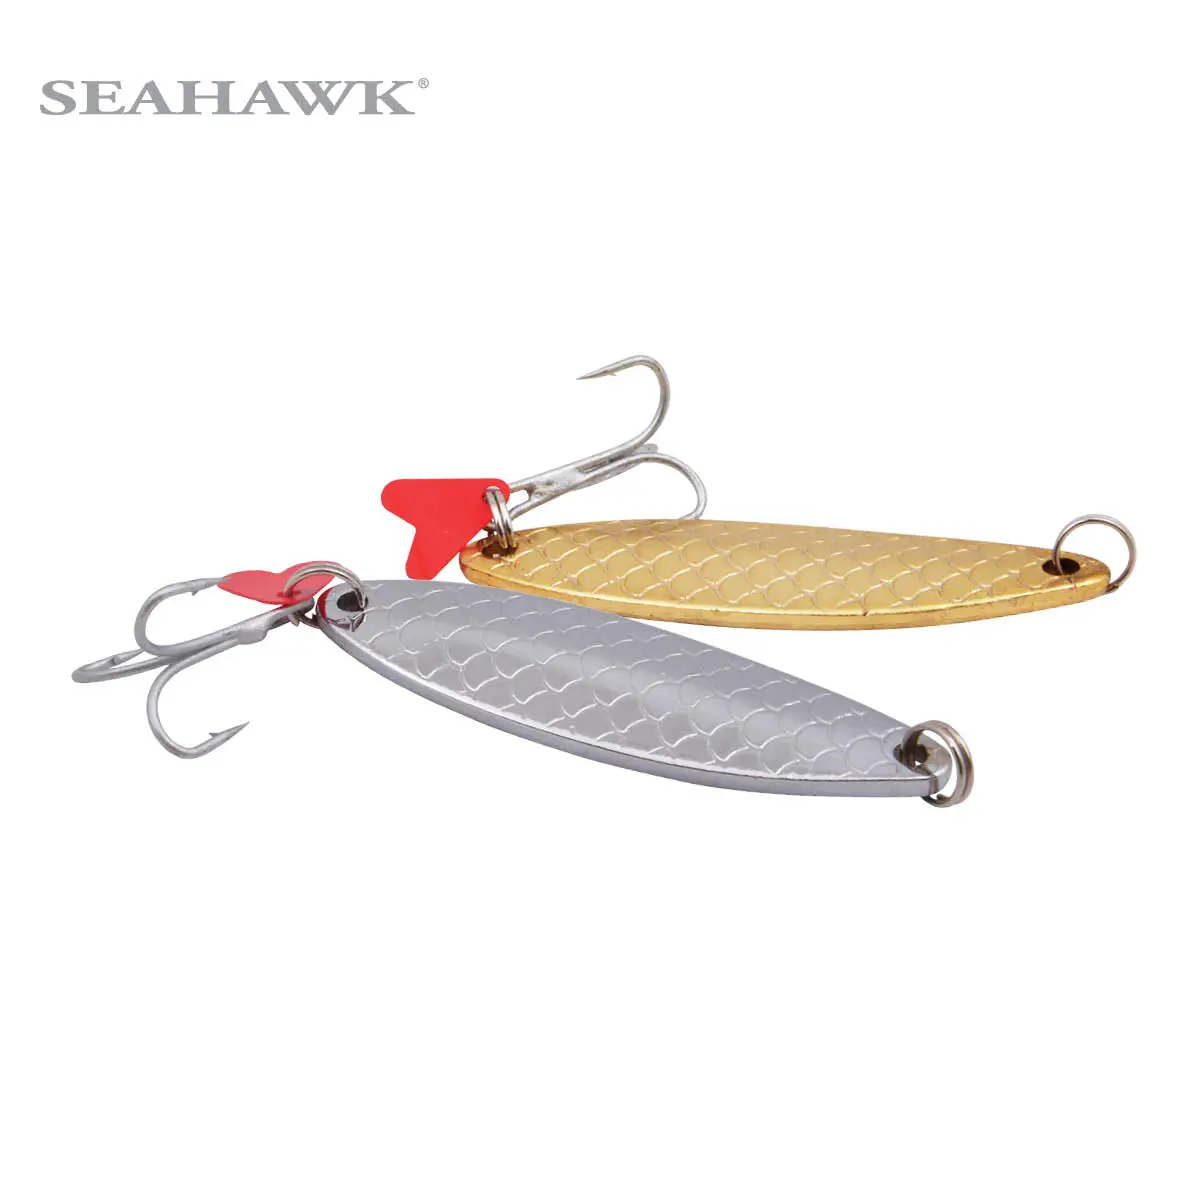 Seahawk Spoon Lure - Spoons - Koster Spoon Lures